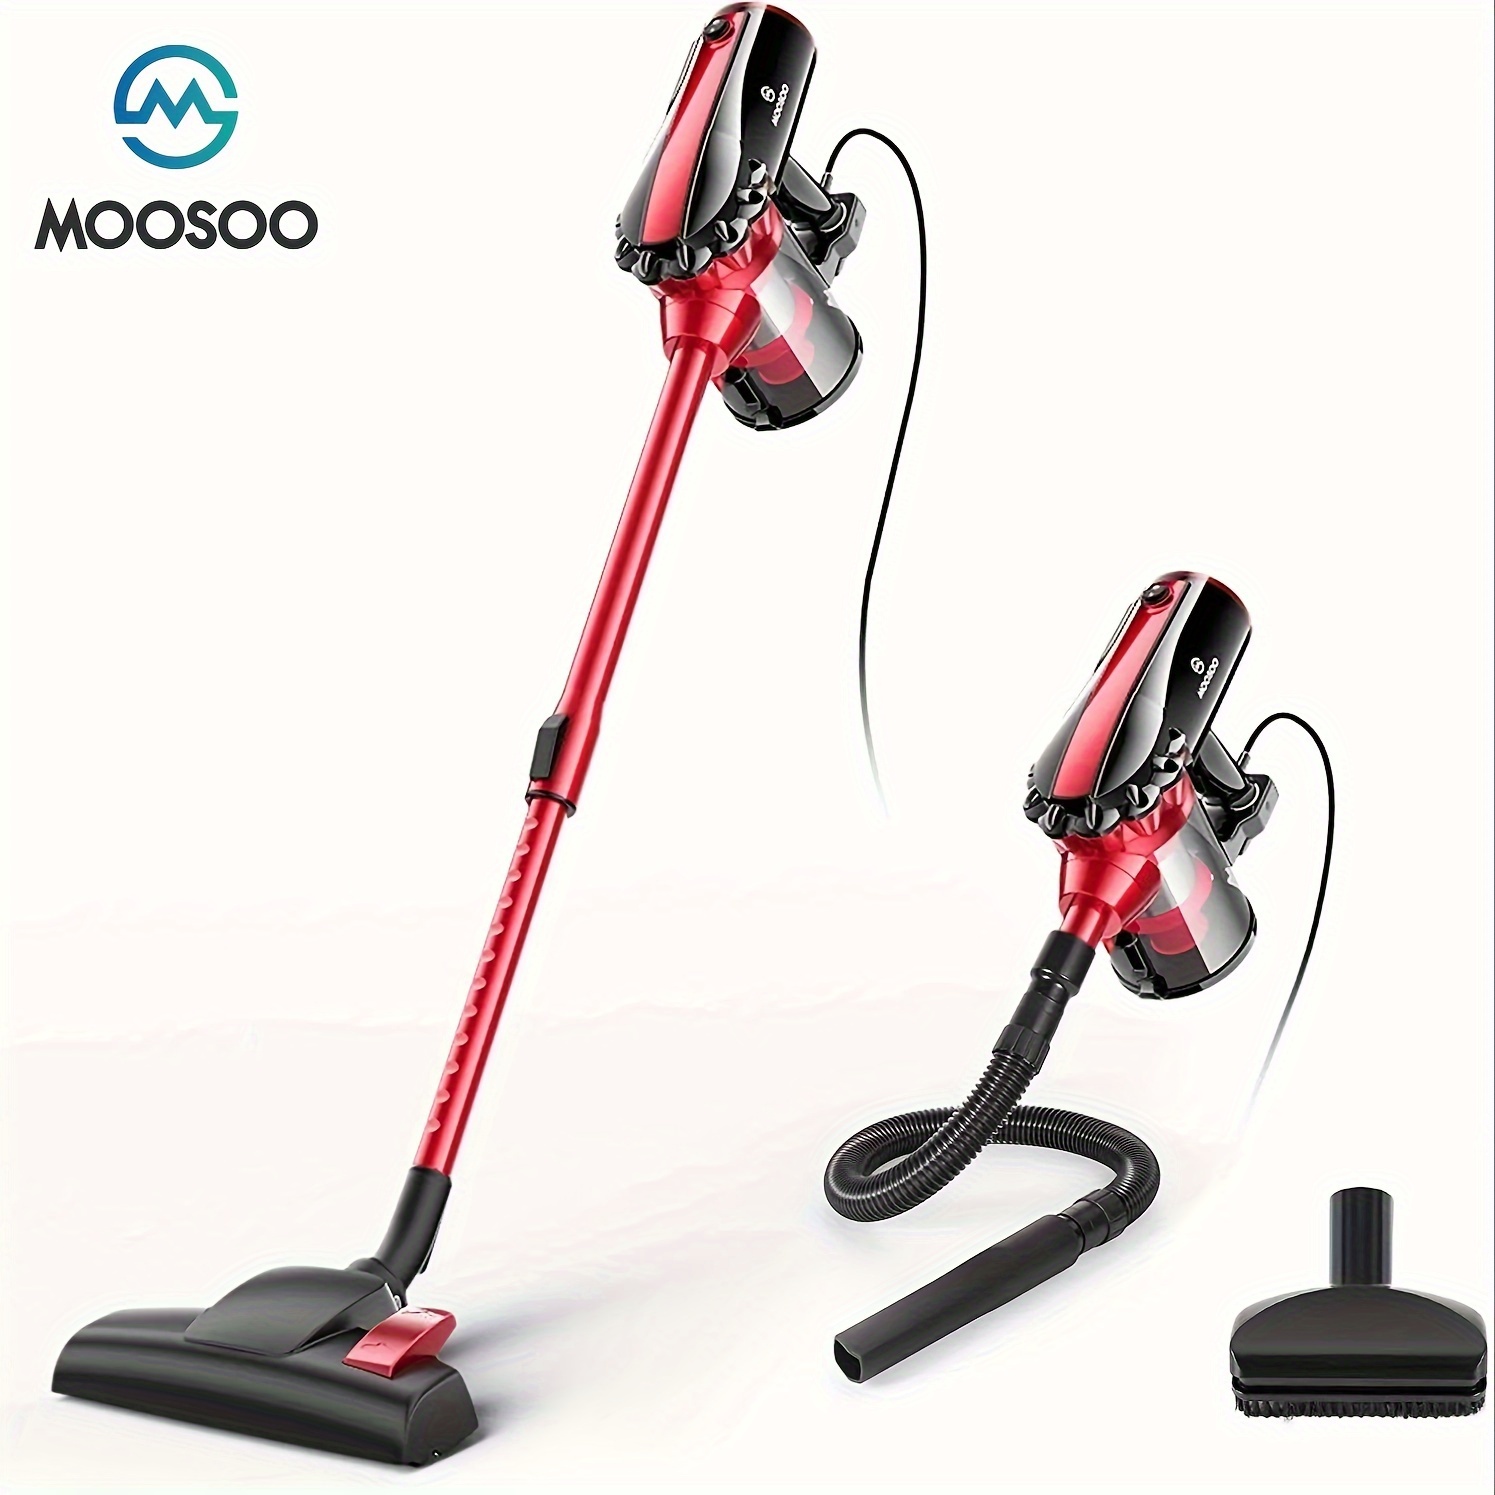 

D600 Stick Vacuum, Cord Vacuum Cleaner With 23ft Long Hose For Carpet Pet Hair Hard Floor